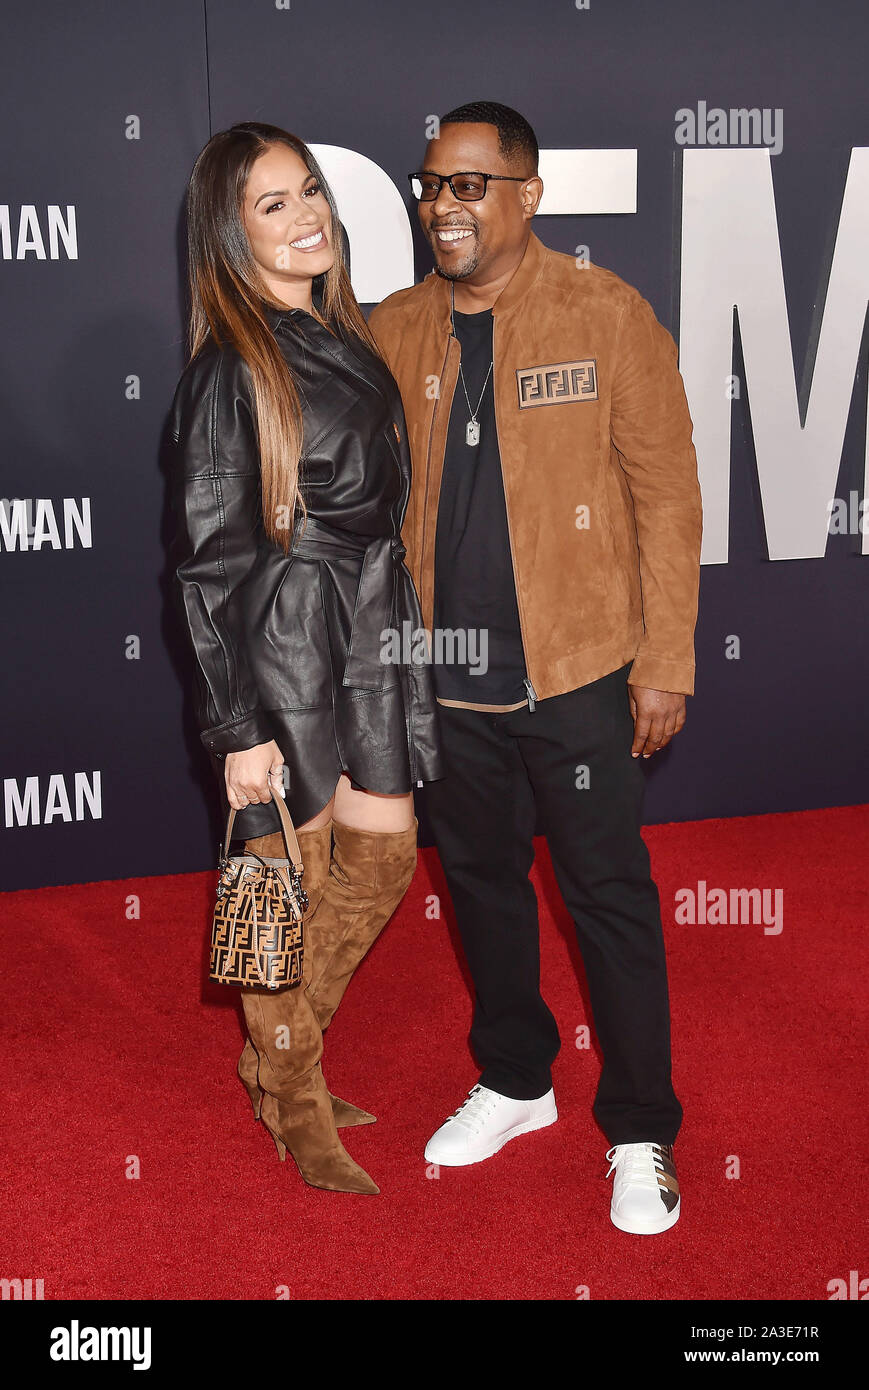 HOLLYWOOD, CA - OCTOBER 06: Roberta Moradfar and Martin Lawrence attend Paramount Pictures' Premiere Of 'Gemini Man' at TCL Chinese Theatre on October 06, 2019 in Hollywood, California. Stock Photo